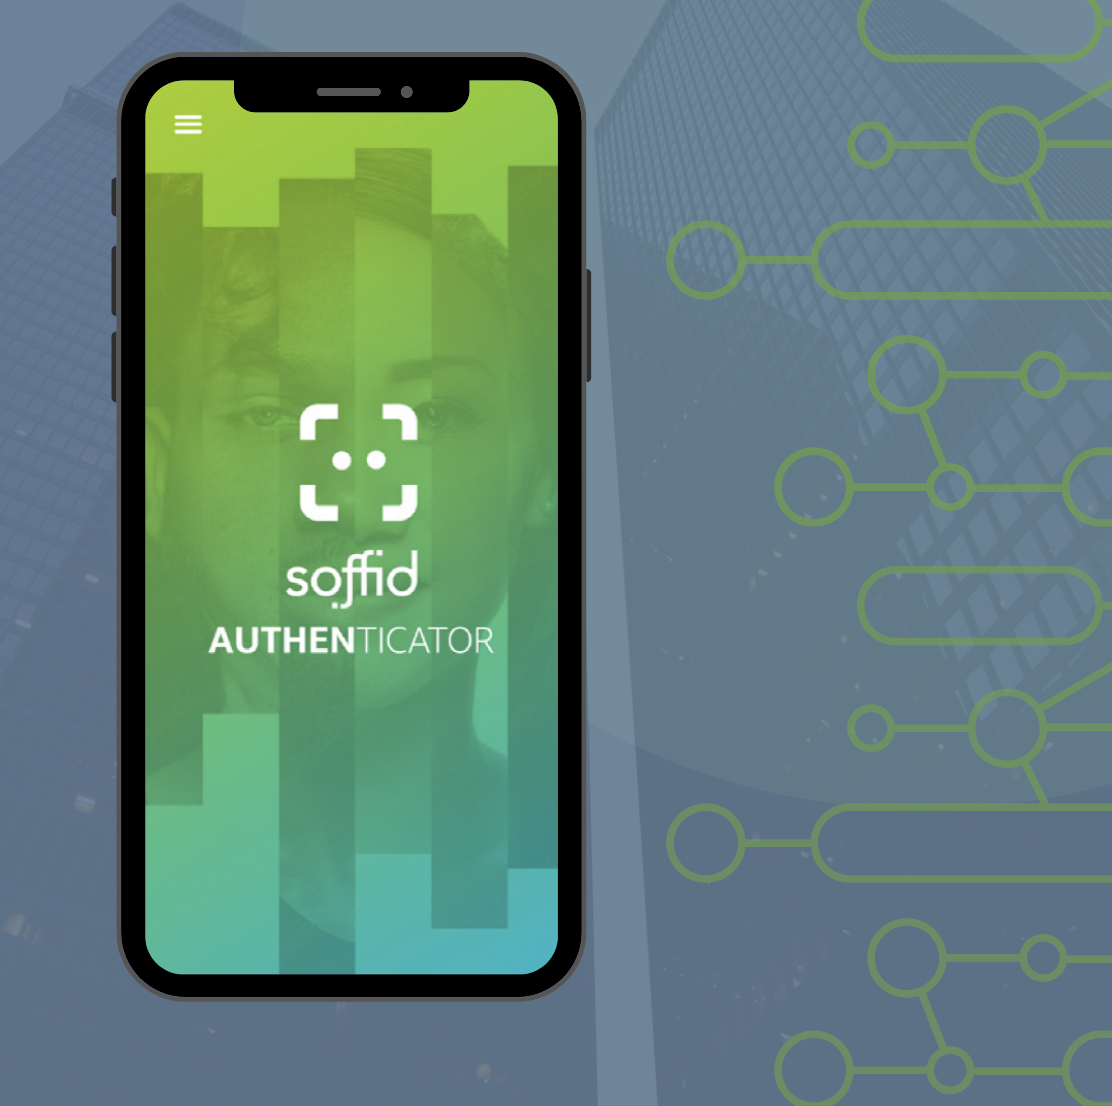 Introducing the New Soffid Authenticator: Simplifying Security!